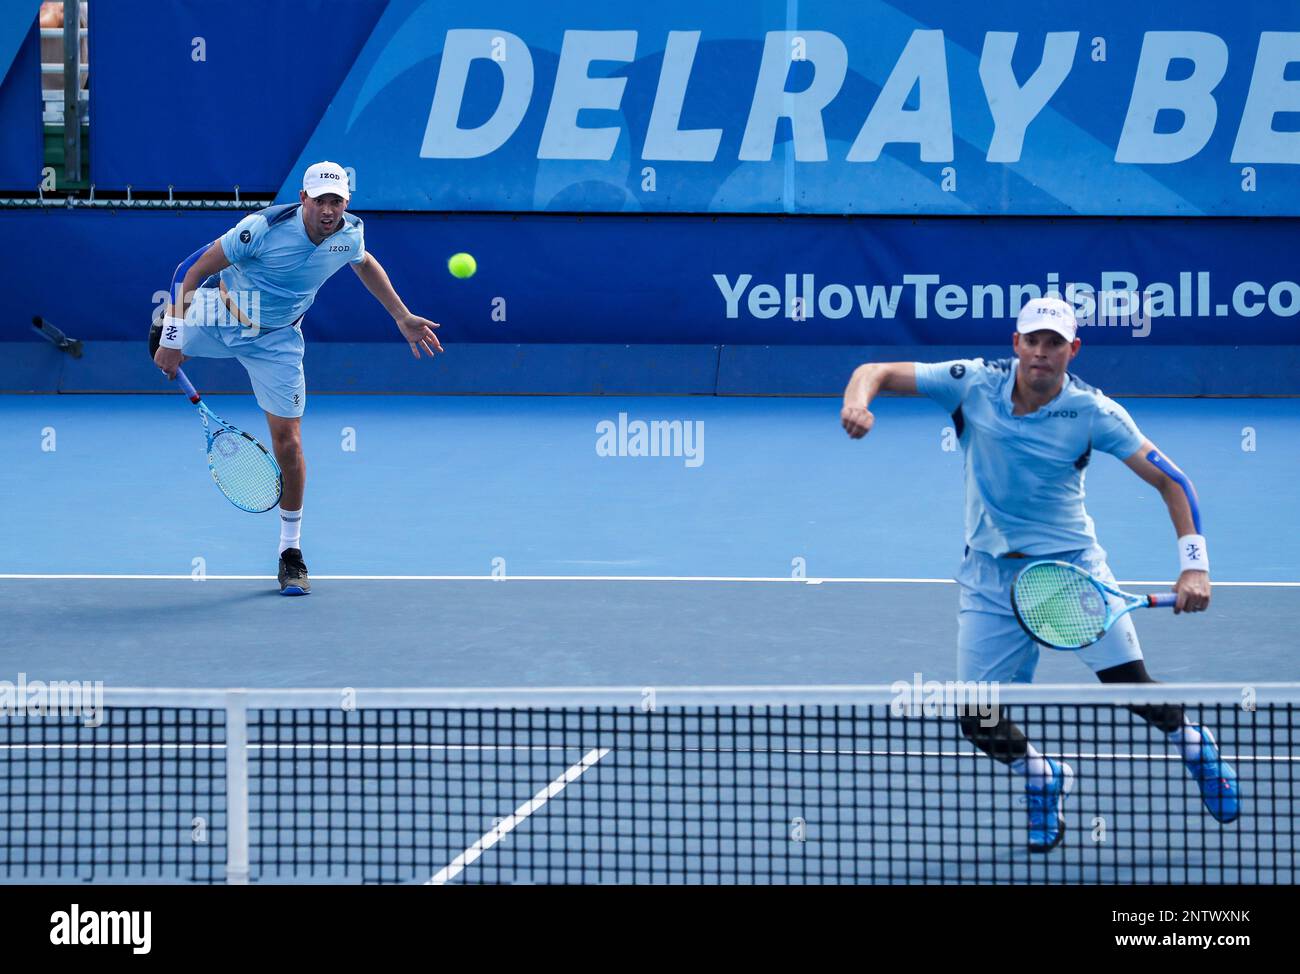 February 23, 2019: Mike Bryan (left), of the United States, serves the  ball, as his brother Bob (right) follows the action, during their seminal  doubles match against Jamie Cerretani, of the United